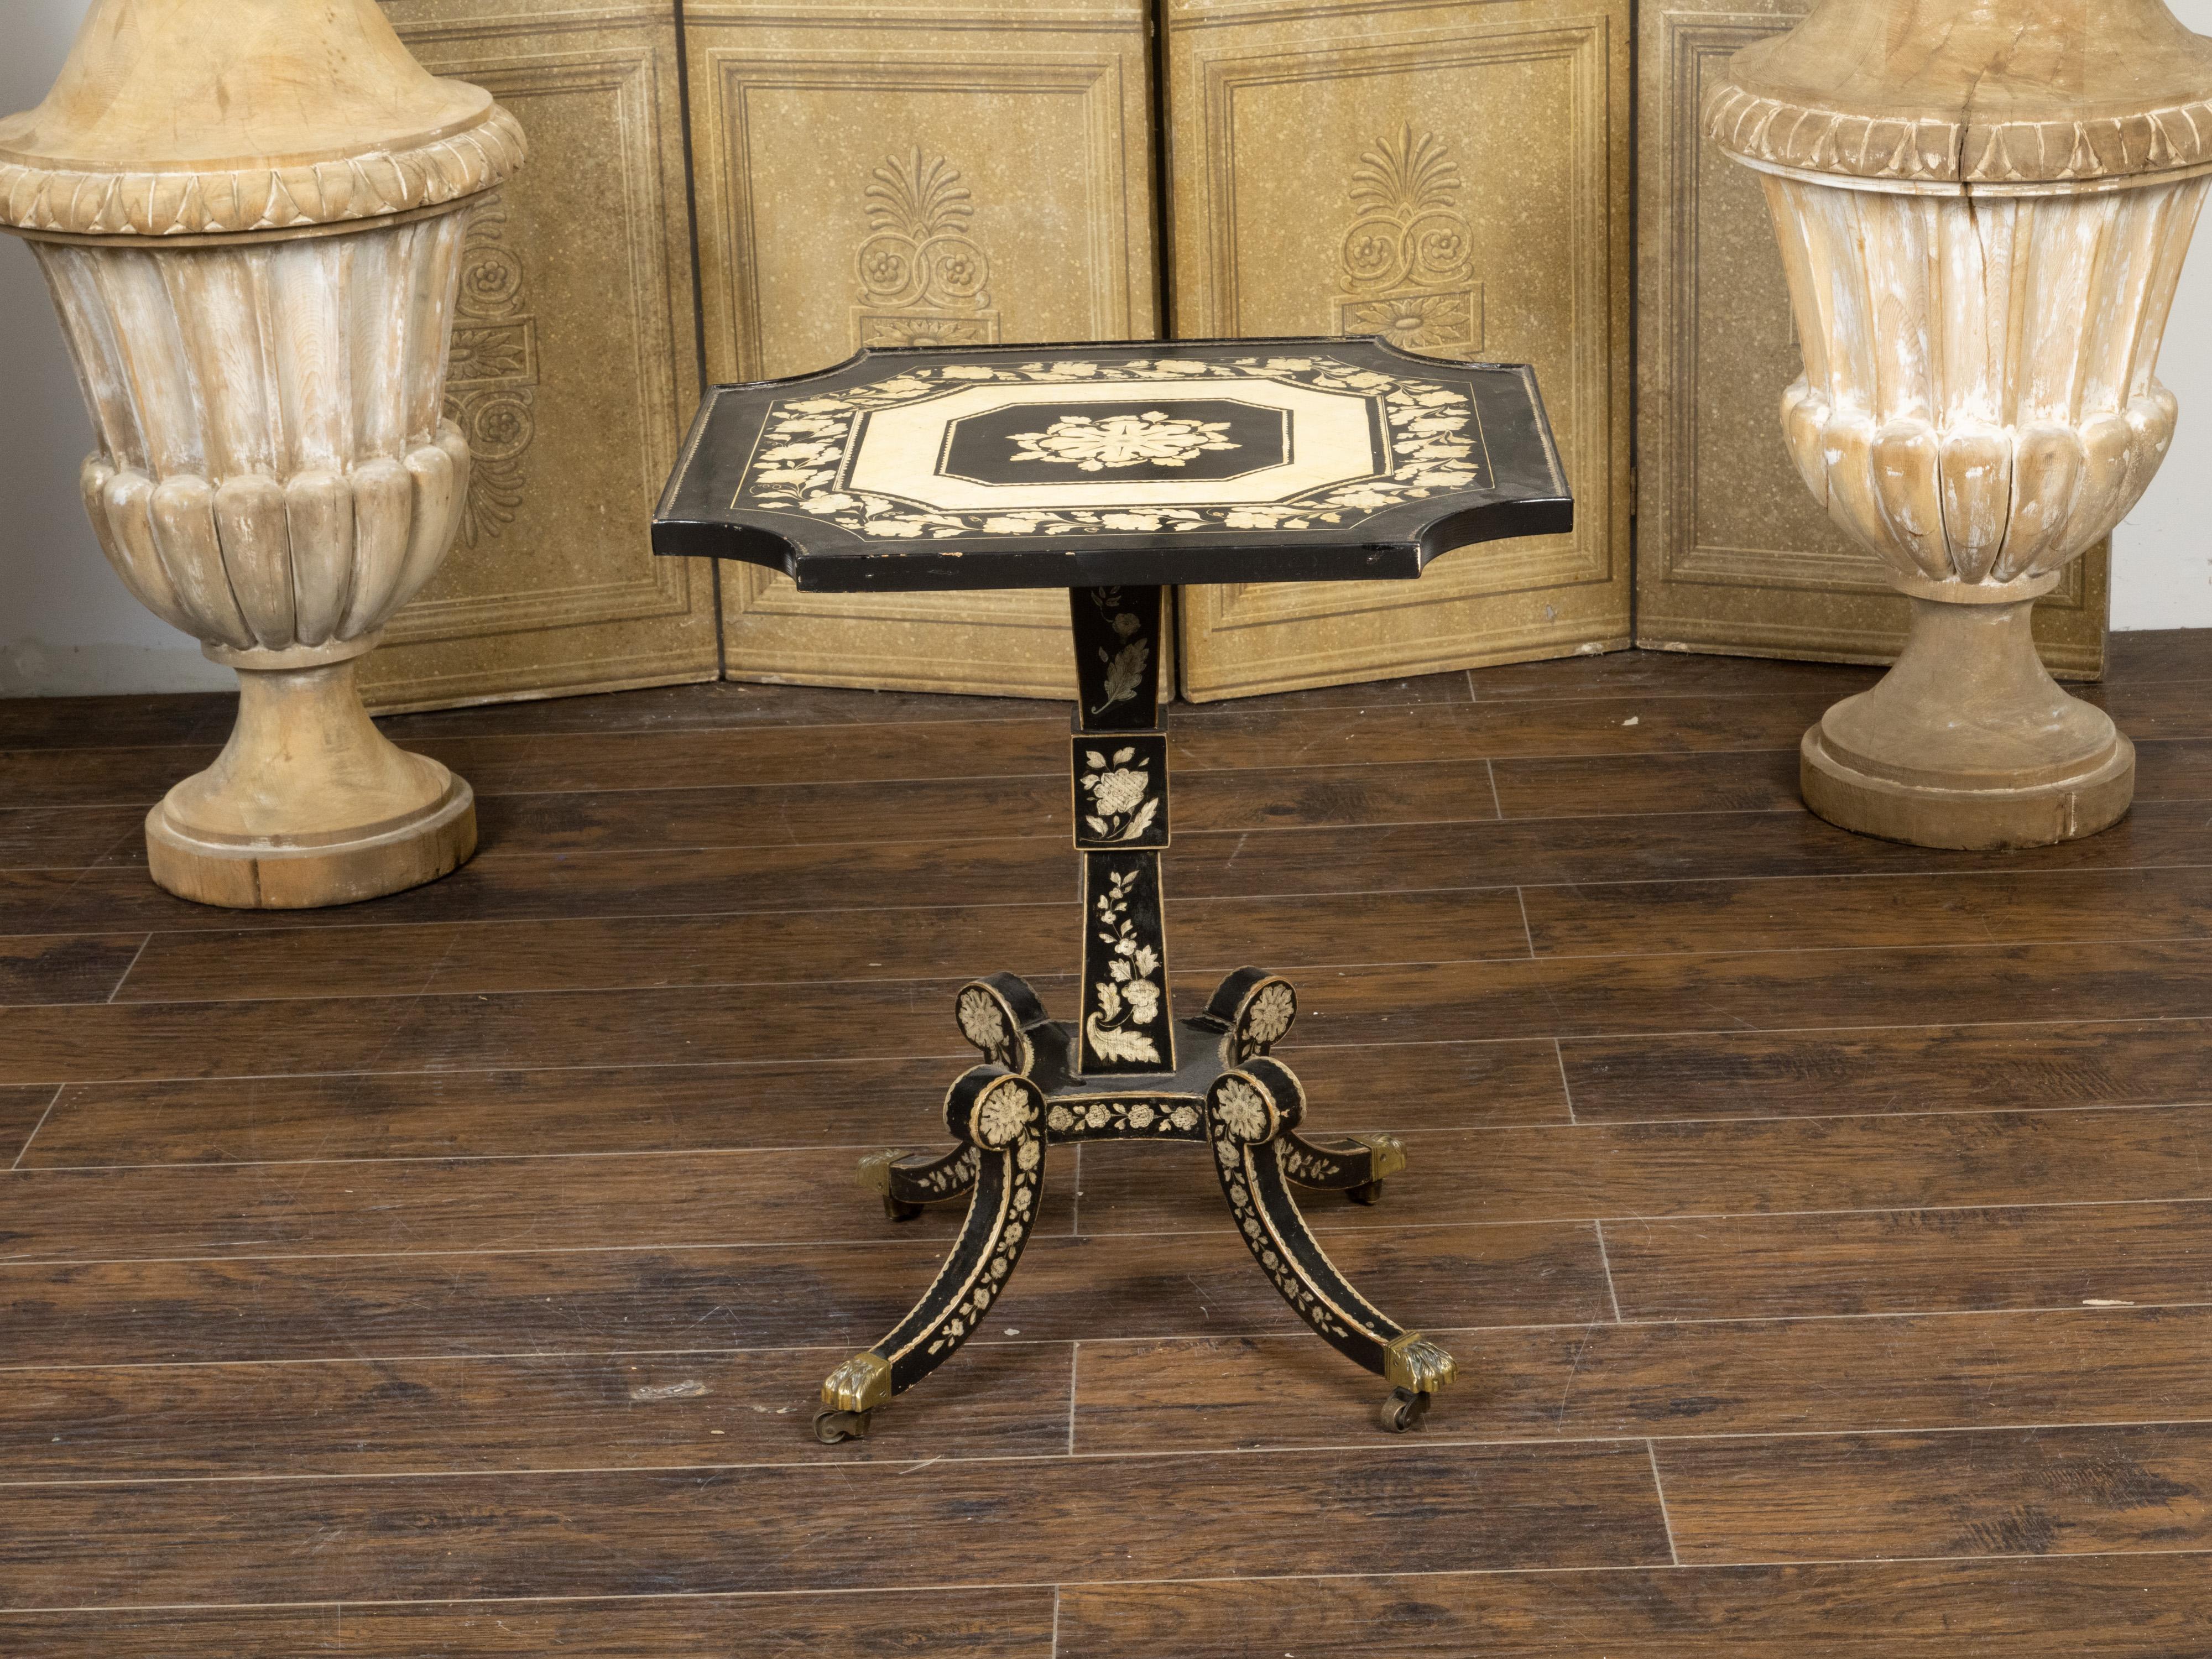 19th Century English Regency Penwork Occasional Table with Floral Décor and Curving Legs For Sale